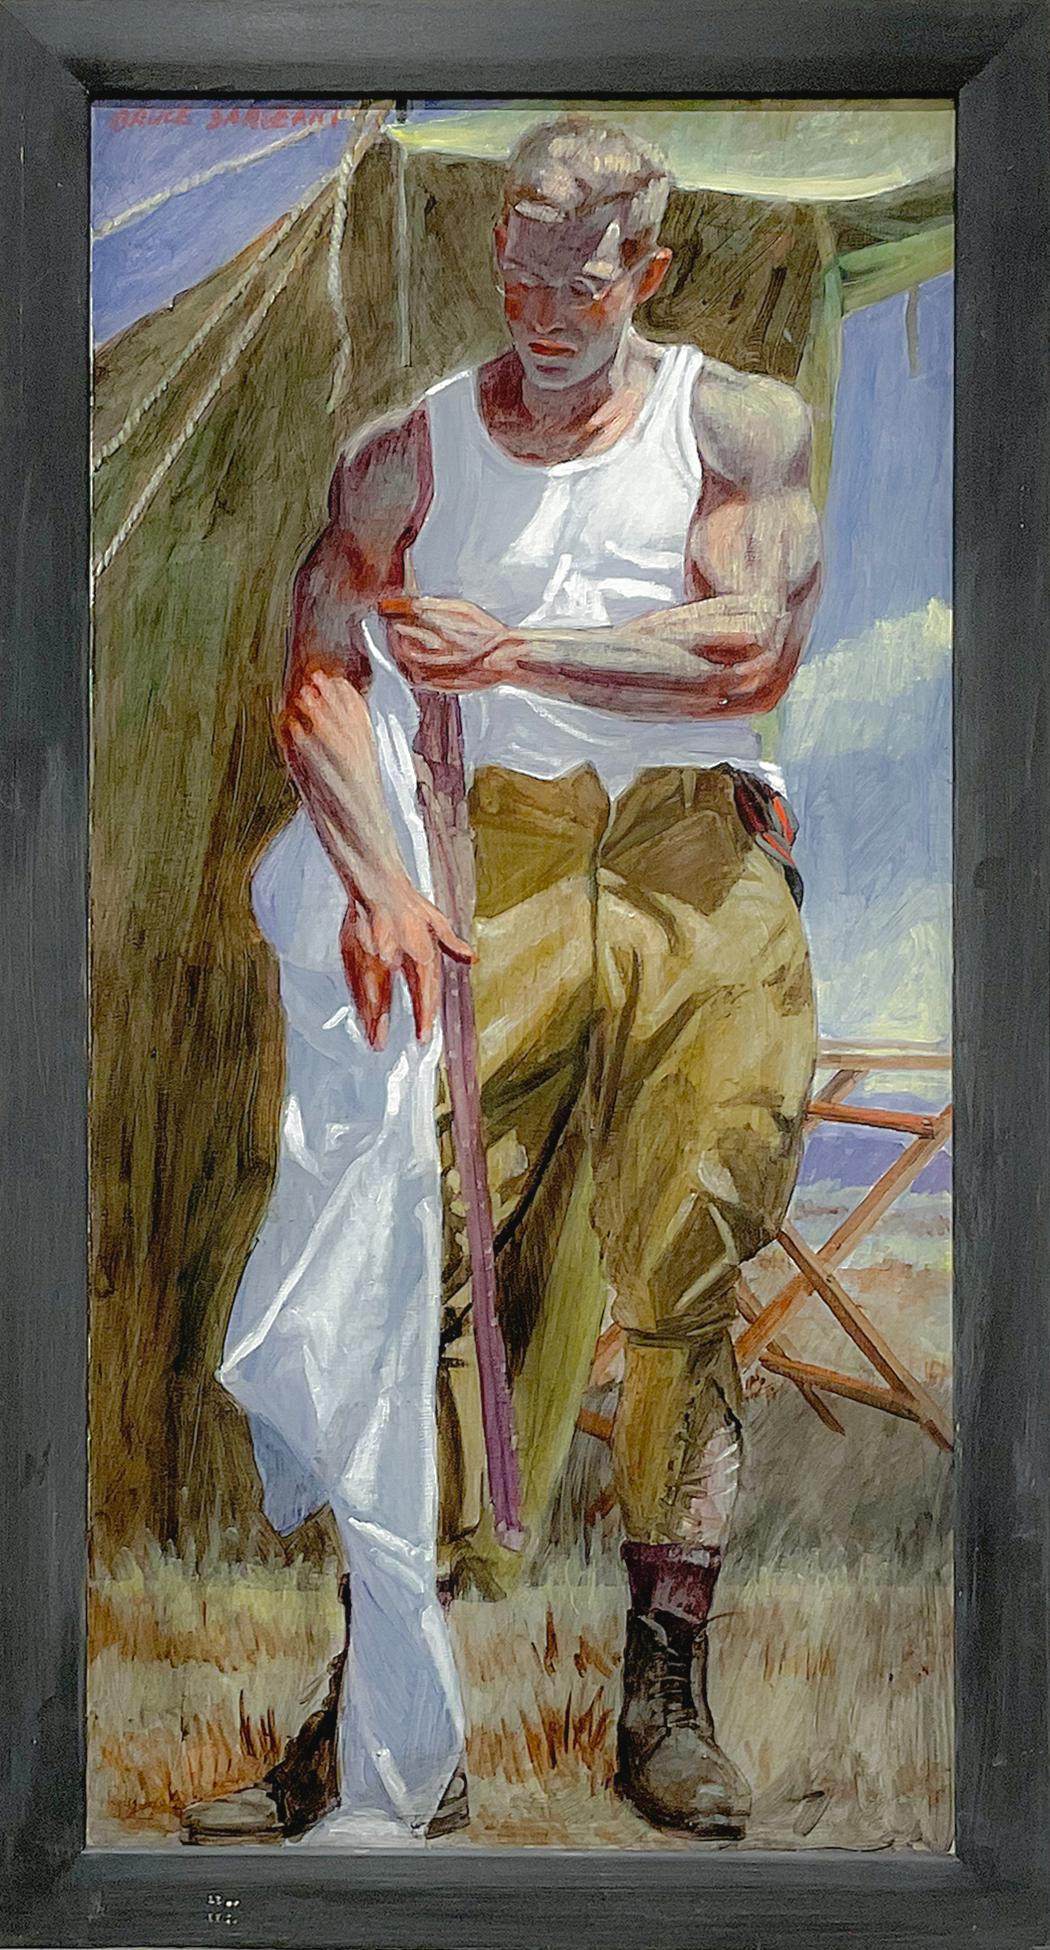 At the Camp (Academic Figurative Painting of Young Male Hunter by Mark Beard)